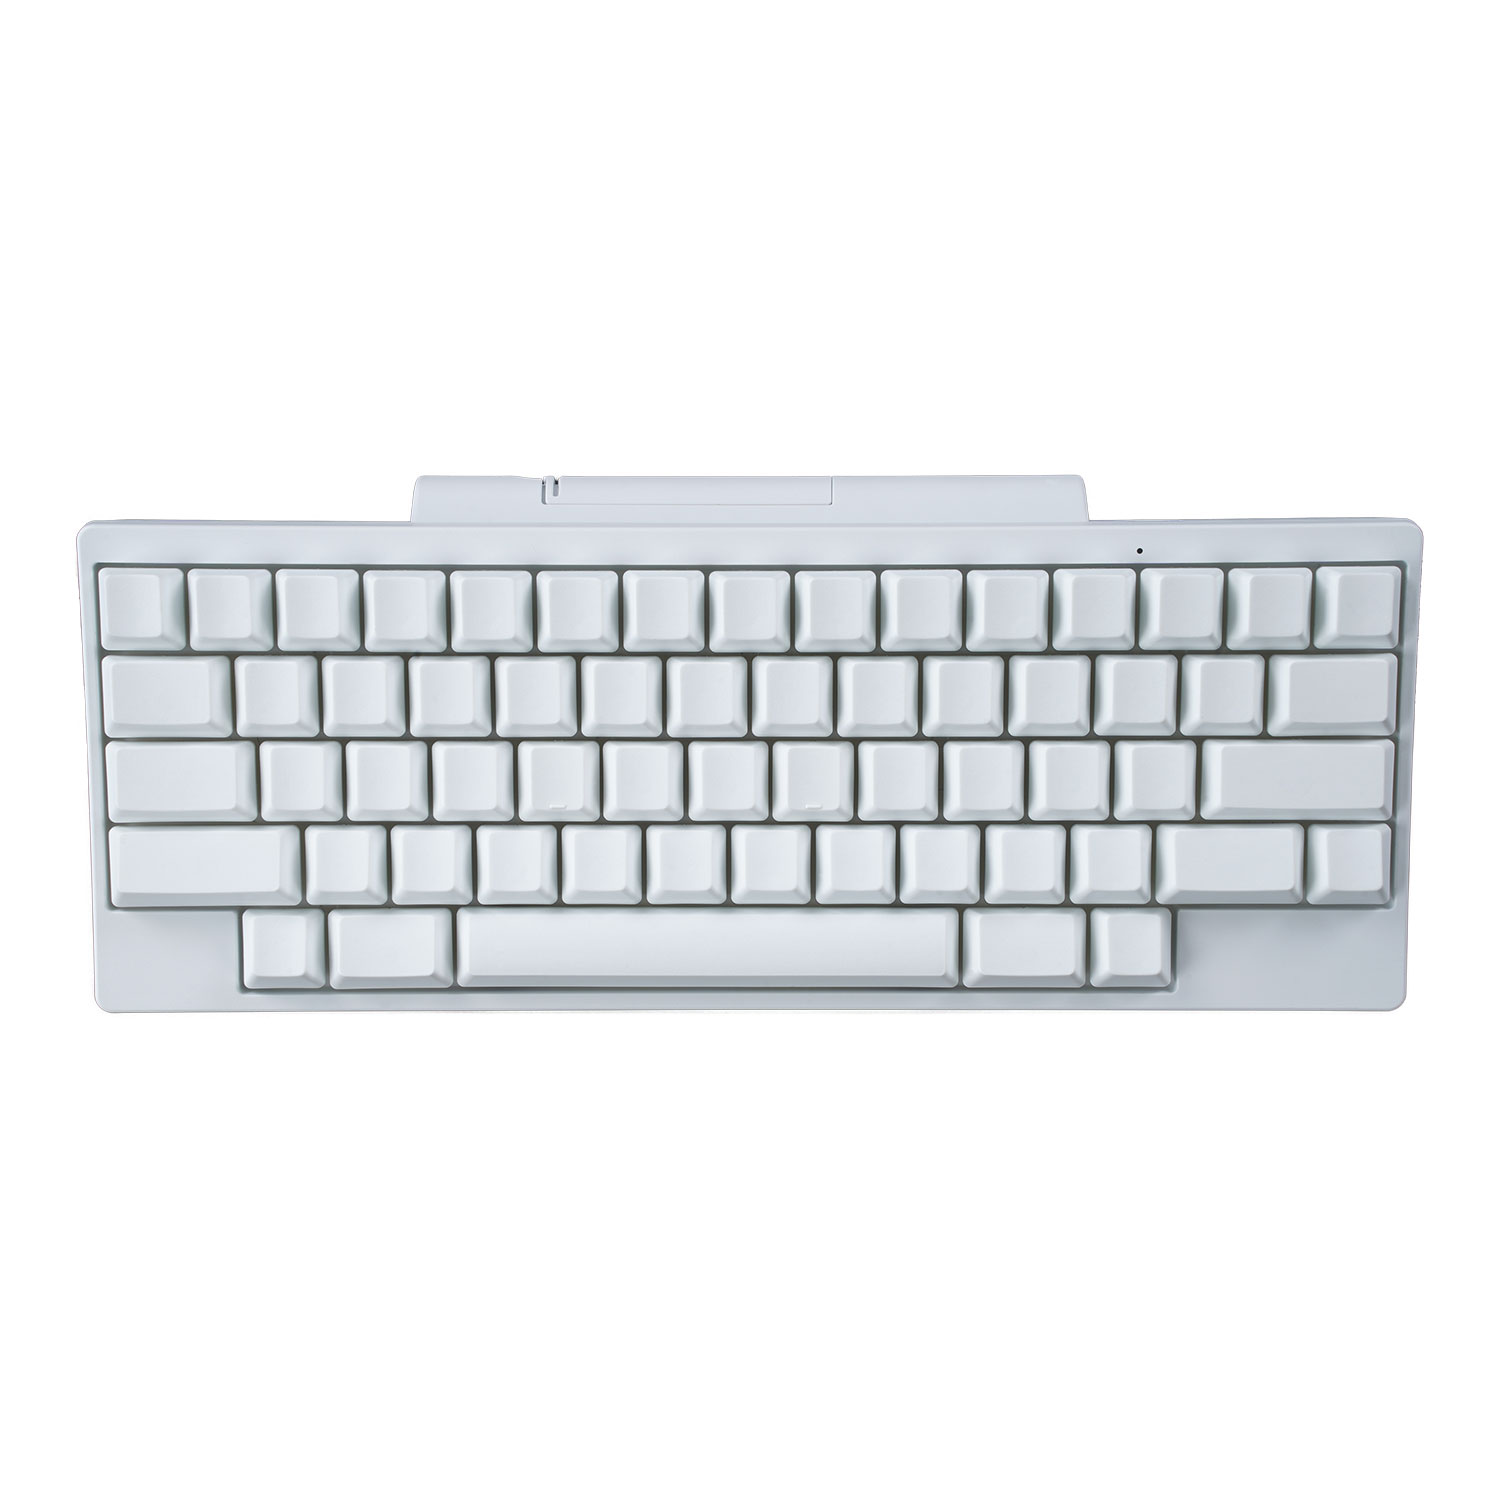 HHKB HYBRID Type-S Snow Keyboard in pure white with blank keycaps